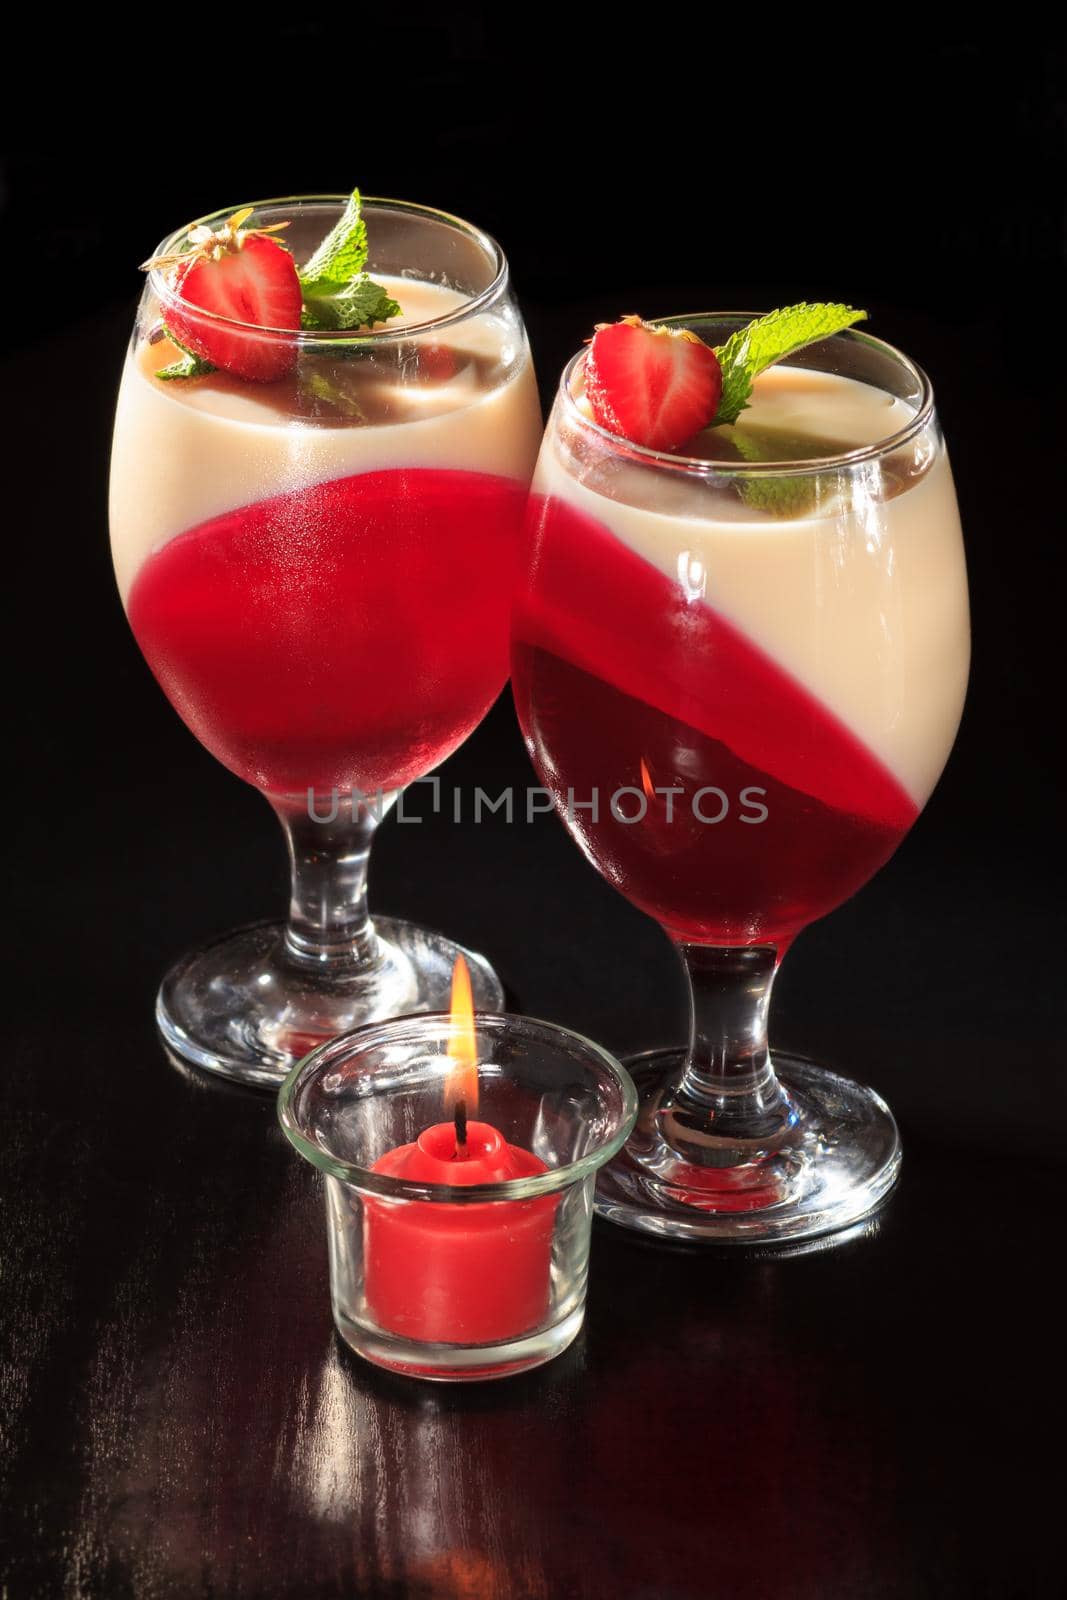 Cherry and milk jelly in the glasses topped mint leaves and strawberry pieces with candle on the black background